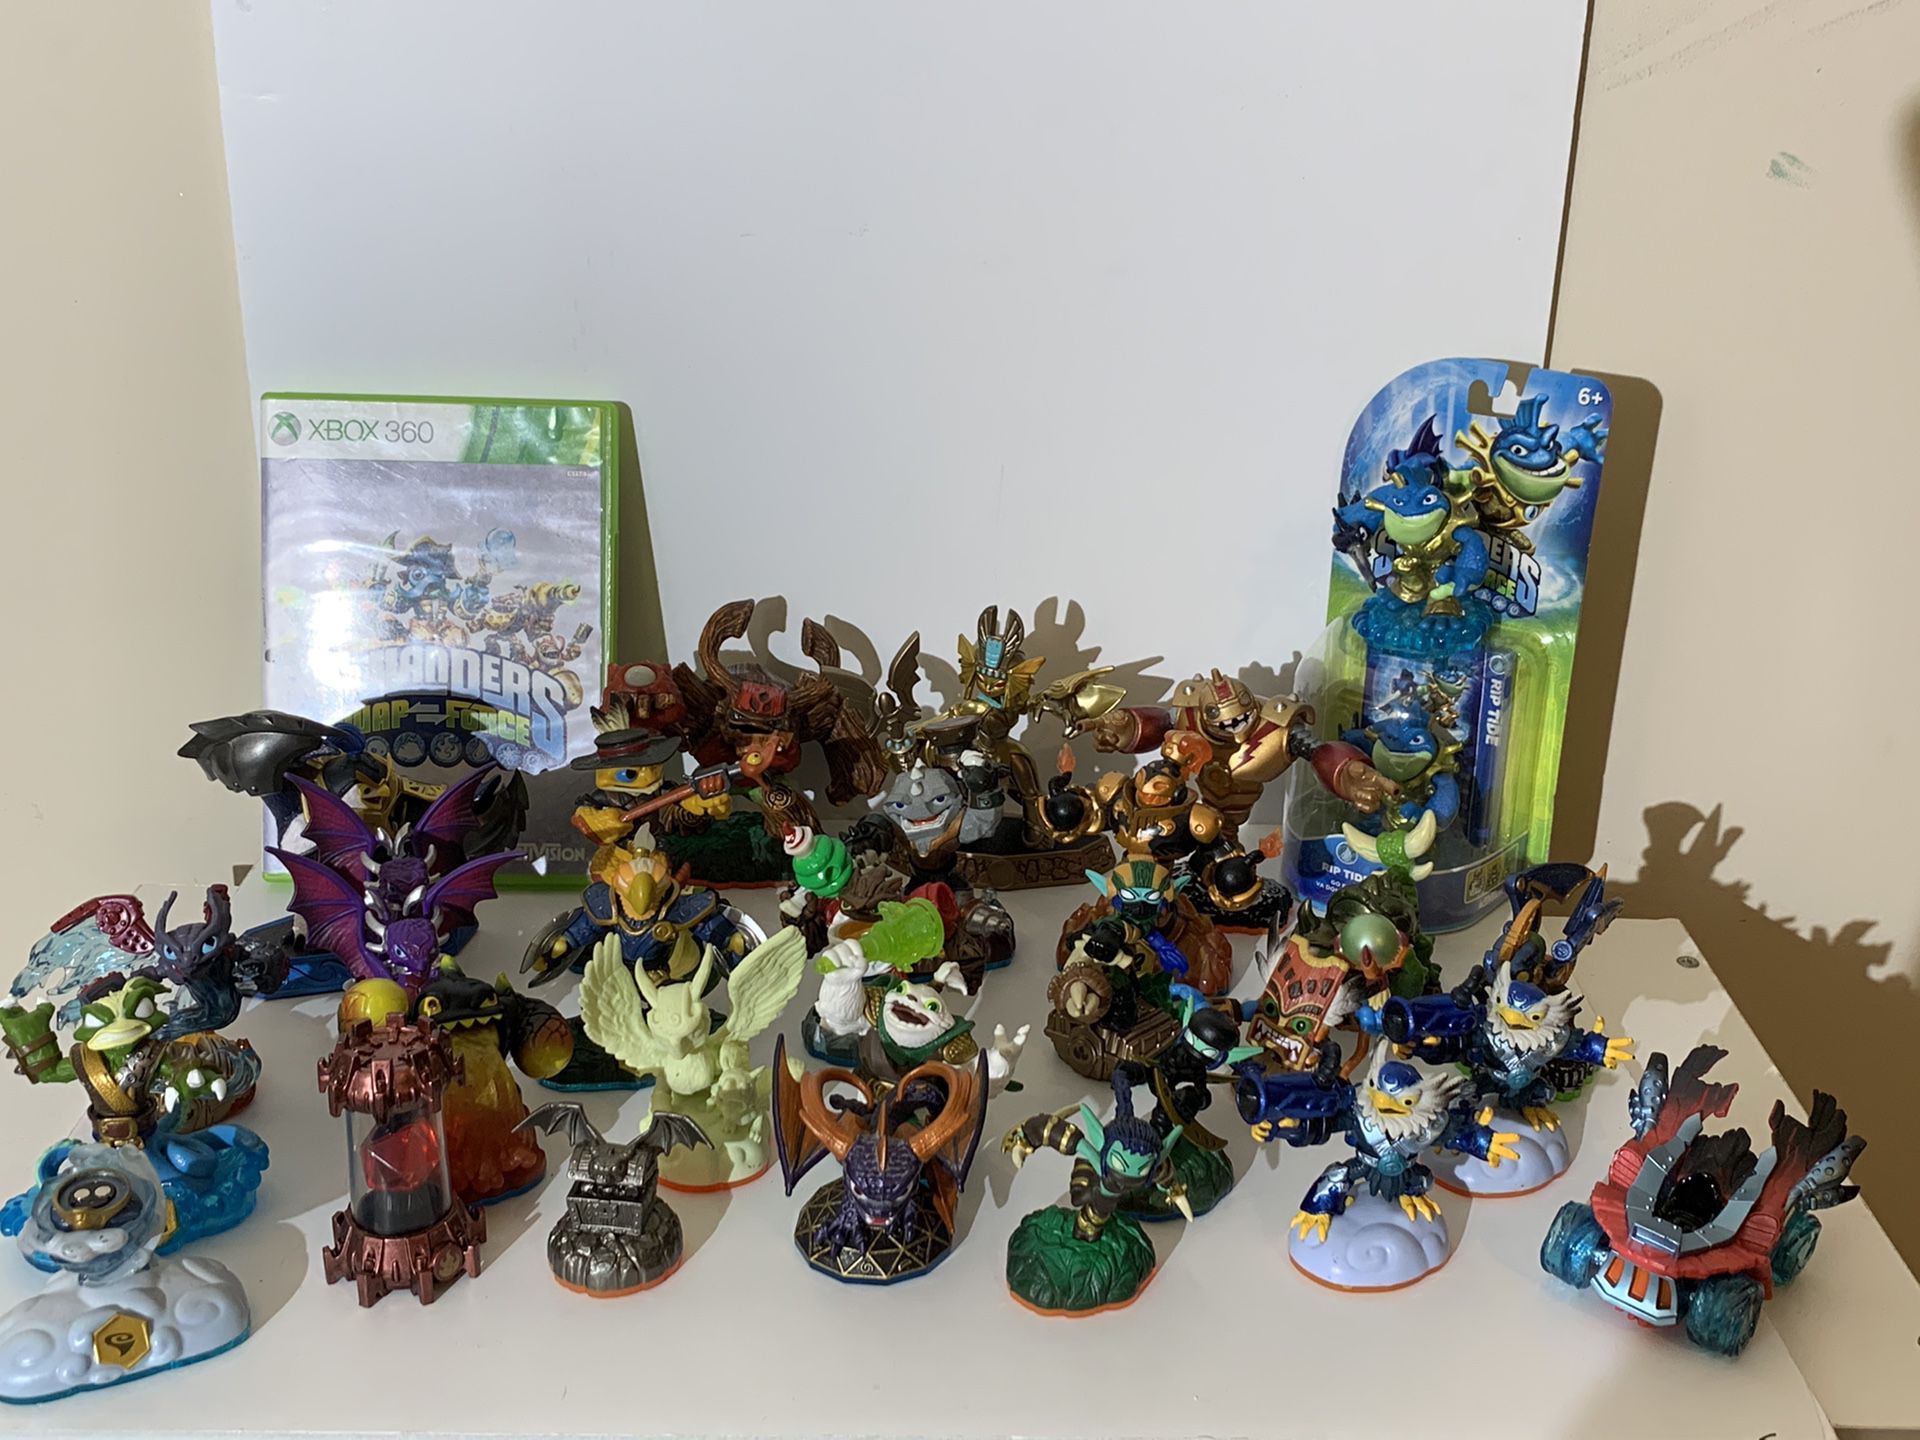 Sky landers - lot- Over 30 pieces- 3 portals ( Xbox 360,ps3)-( These can work on most systems)